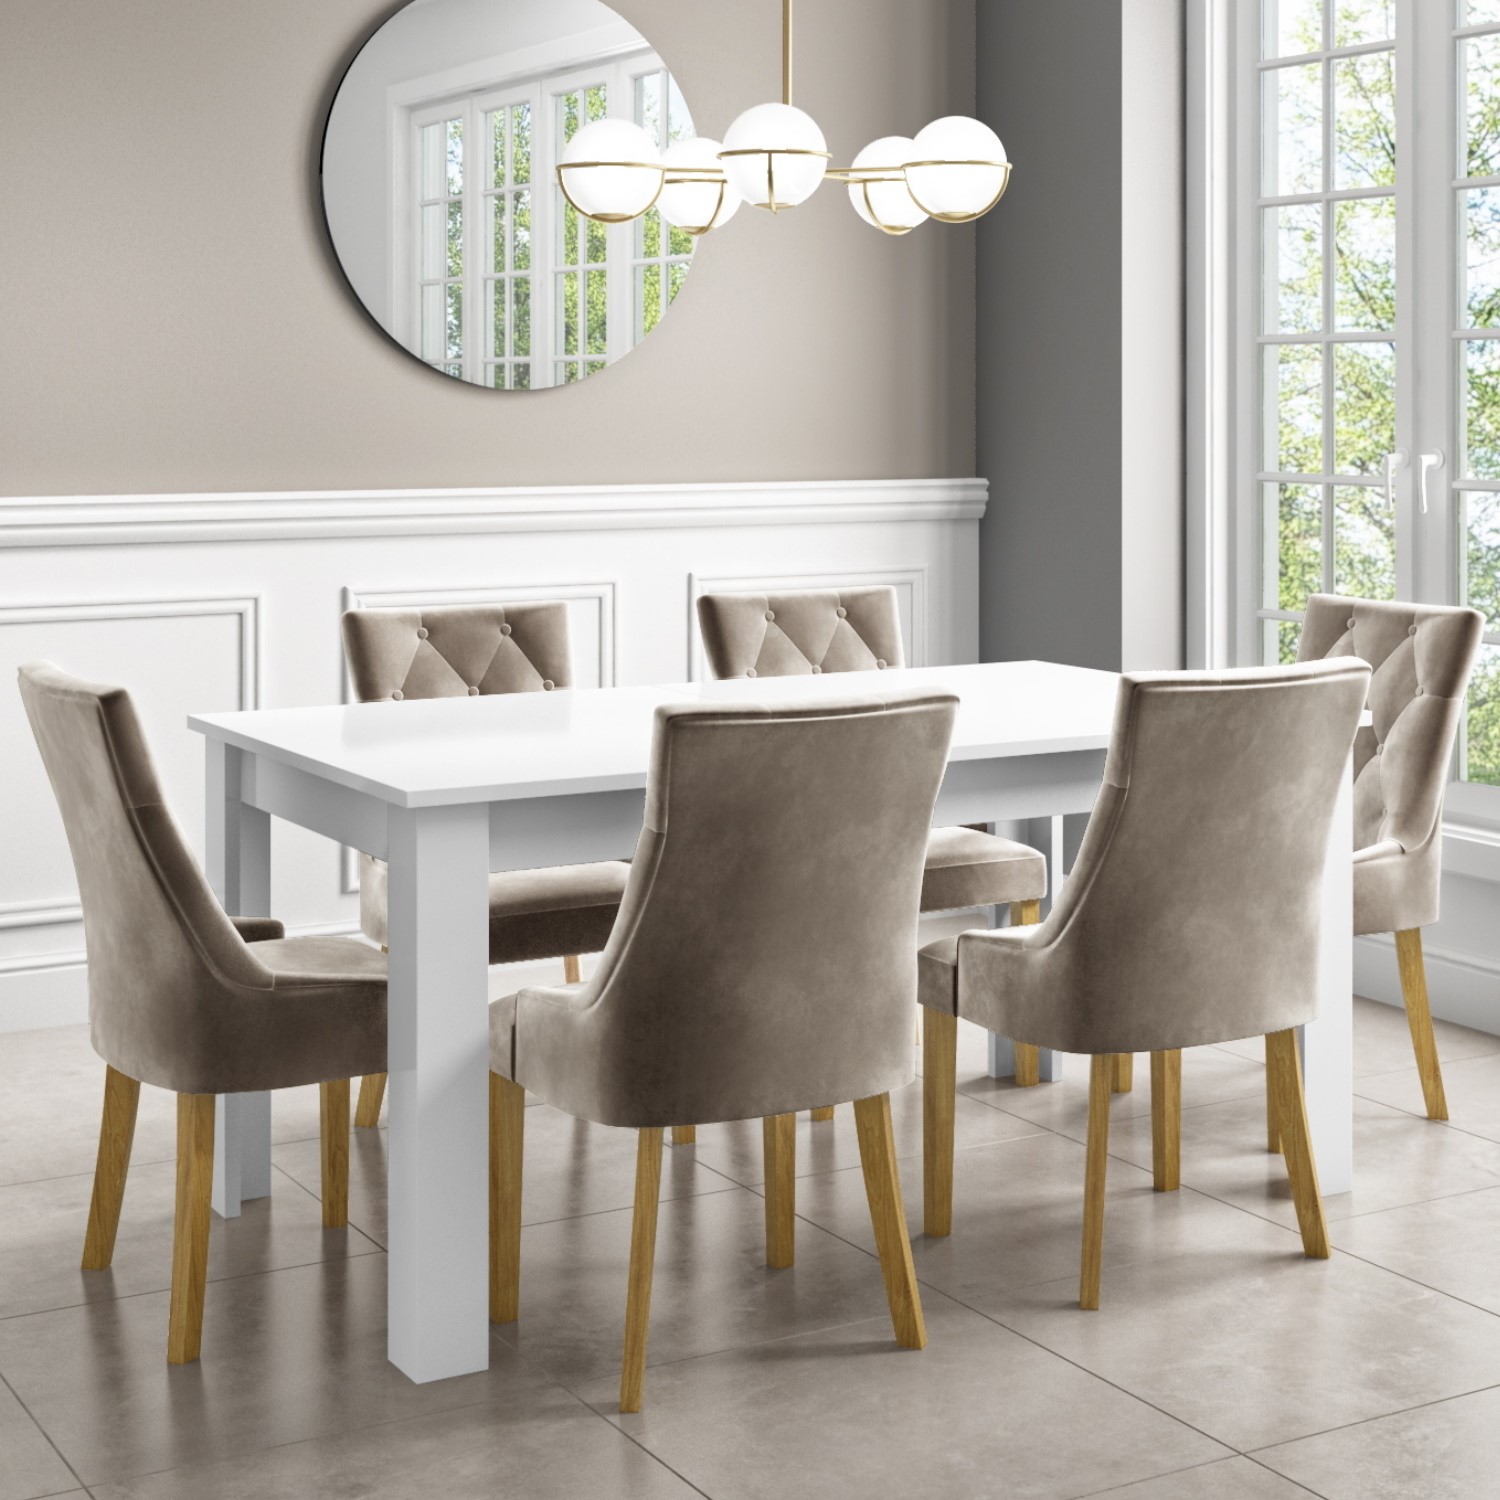 High Gloss Extendable Dining Table, White High Gloss Extending Dining Table And 6 Chairs